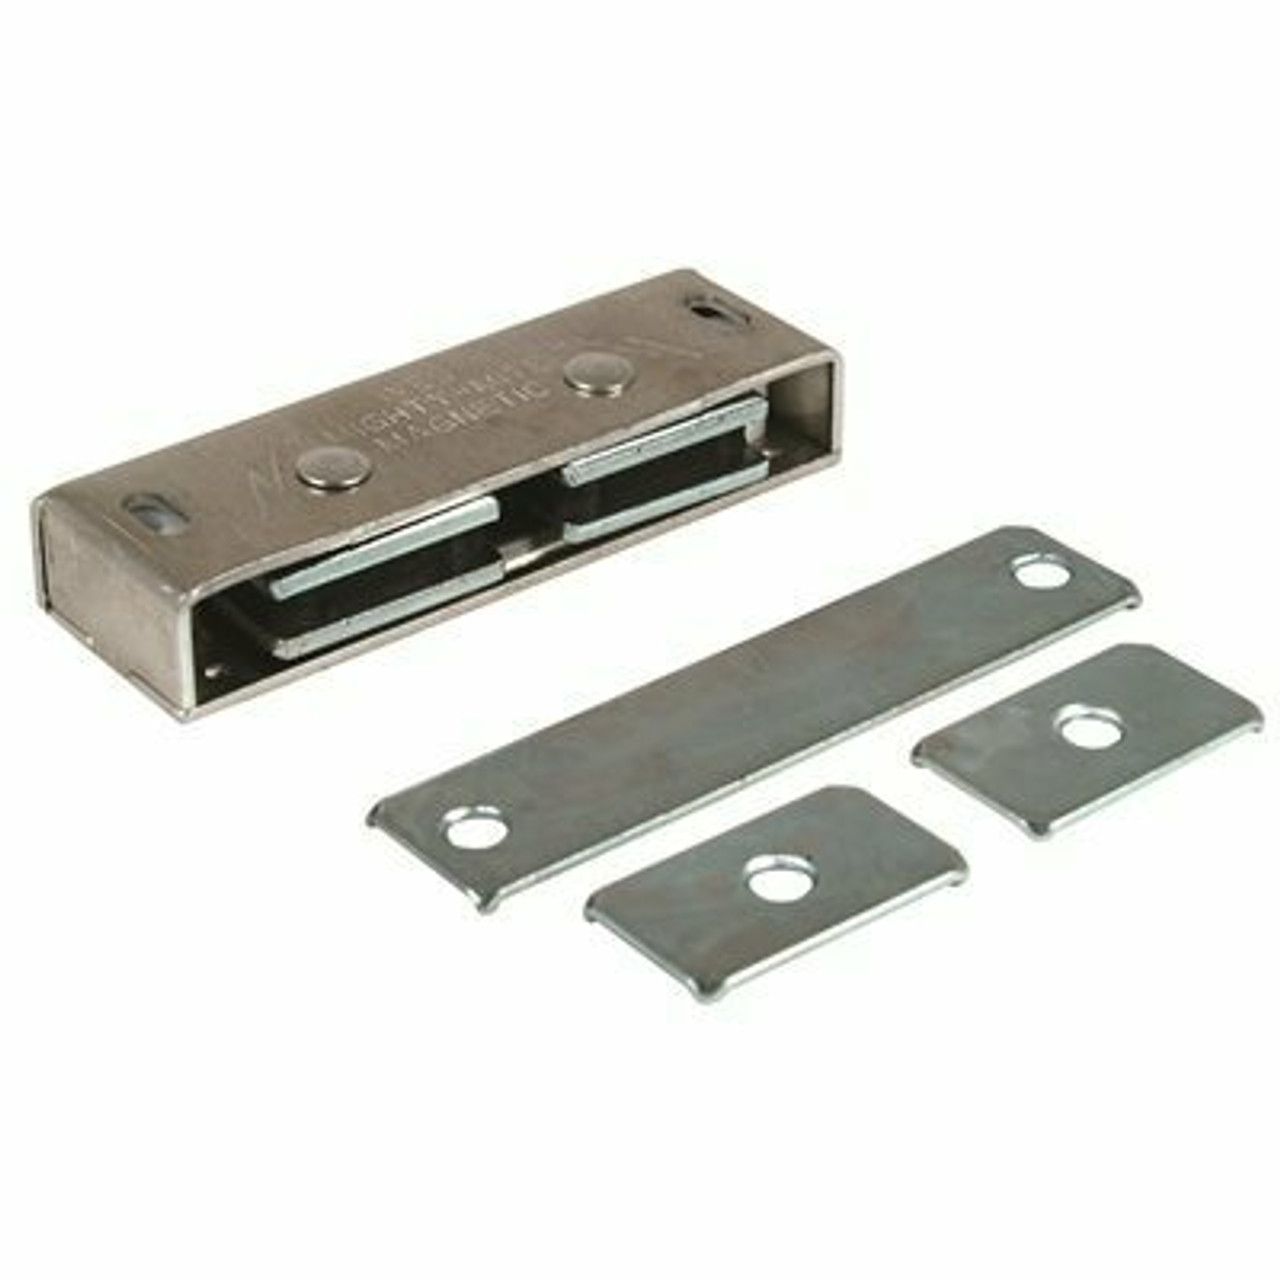 Ives Mighty Mite Aluminum Heavy Duty Magnetic Catch